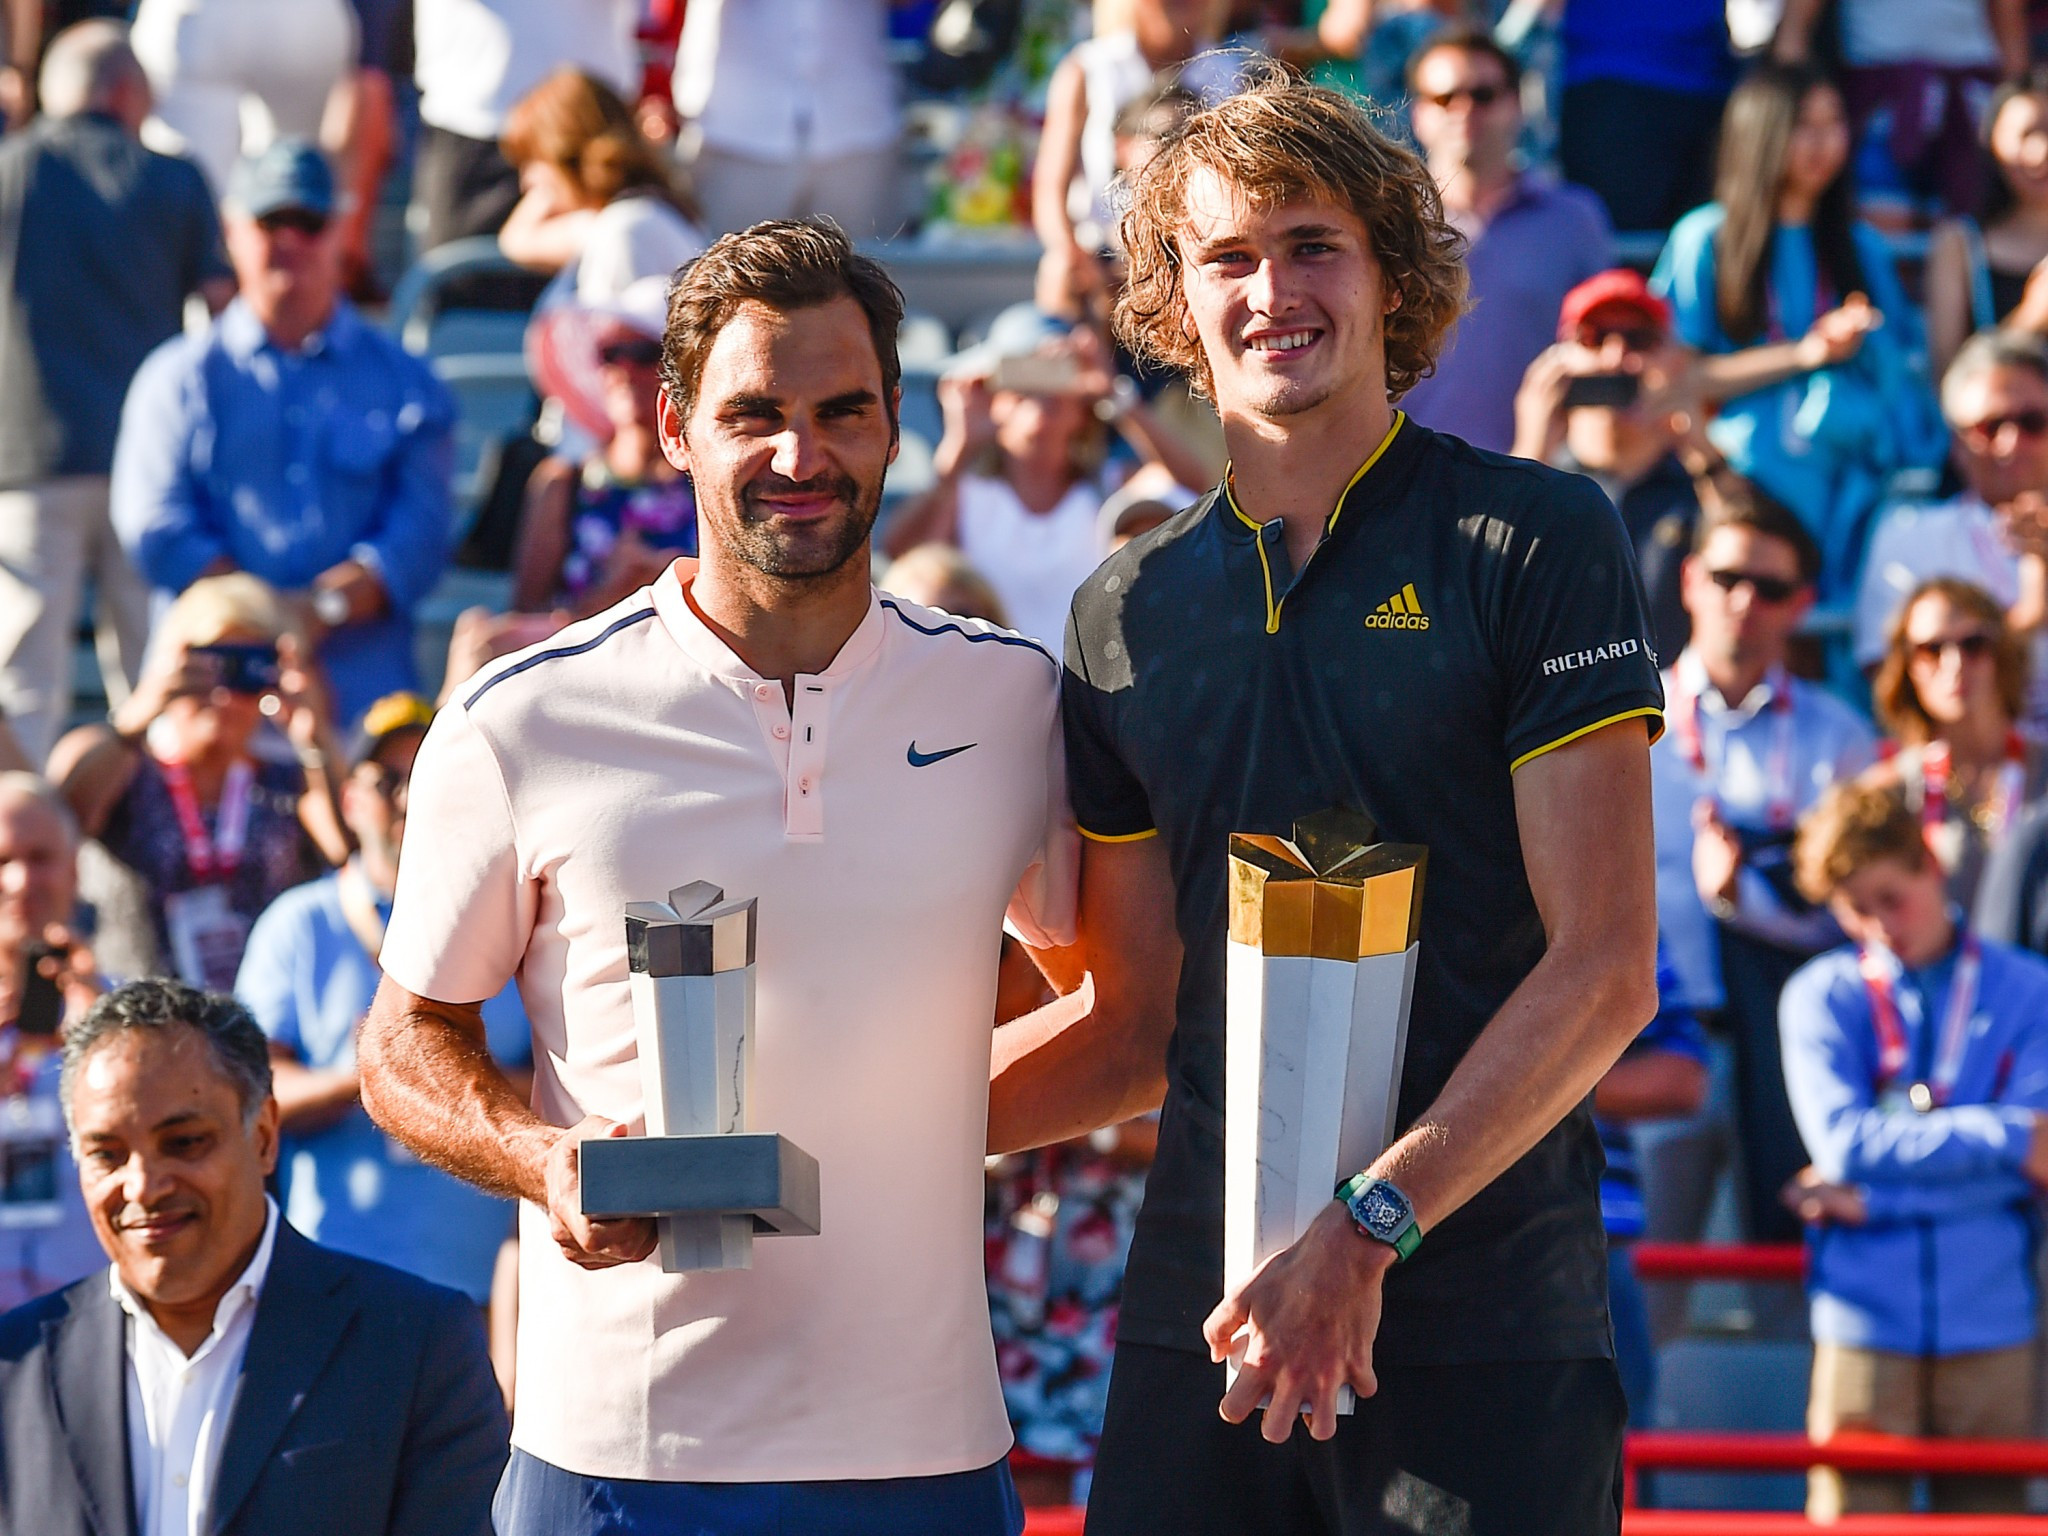 Zverev beats Federer to clinch Rogers Cup title as Svitolina takes women's crown